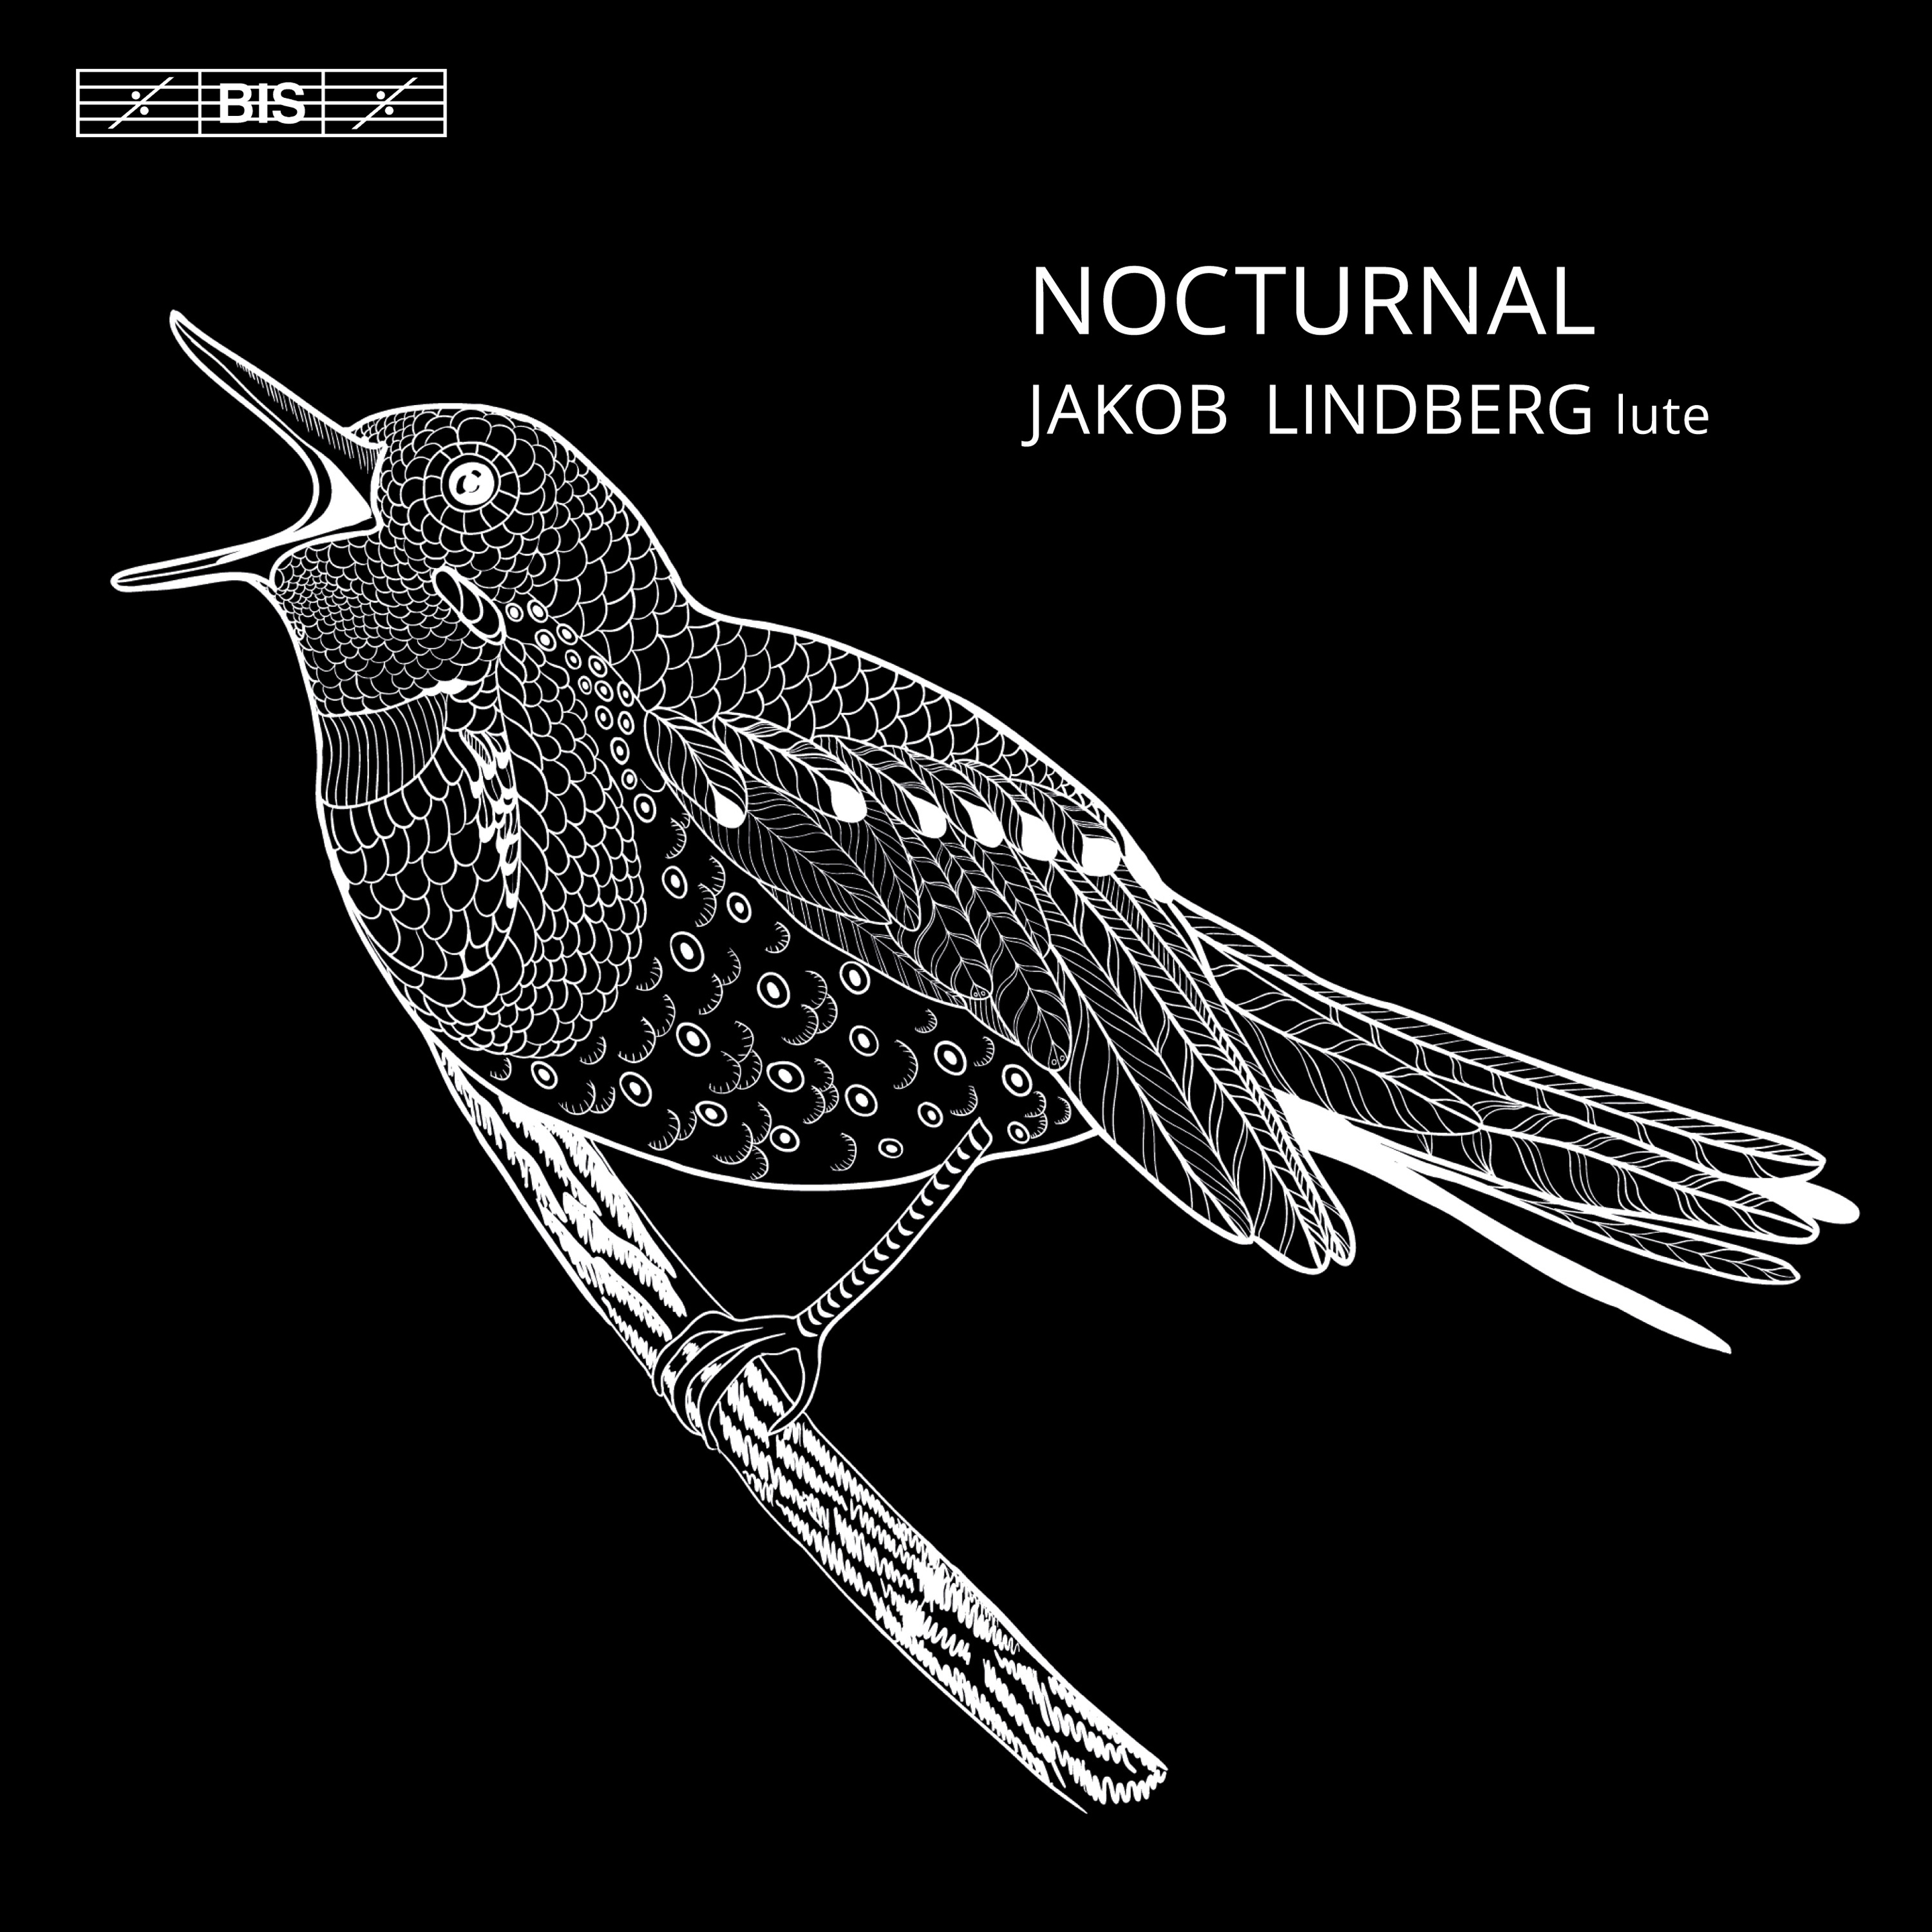 Nocturnal after John Dowland: Reflections on Come, heavy sleep, Op. 70 (arr. J. Lindberg for lute):fter John Dowland, Op. 70 (Reflections on "Come, Heavy Sleep") [Arr. J. Lindberg for Lute]